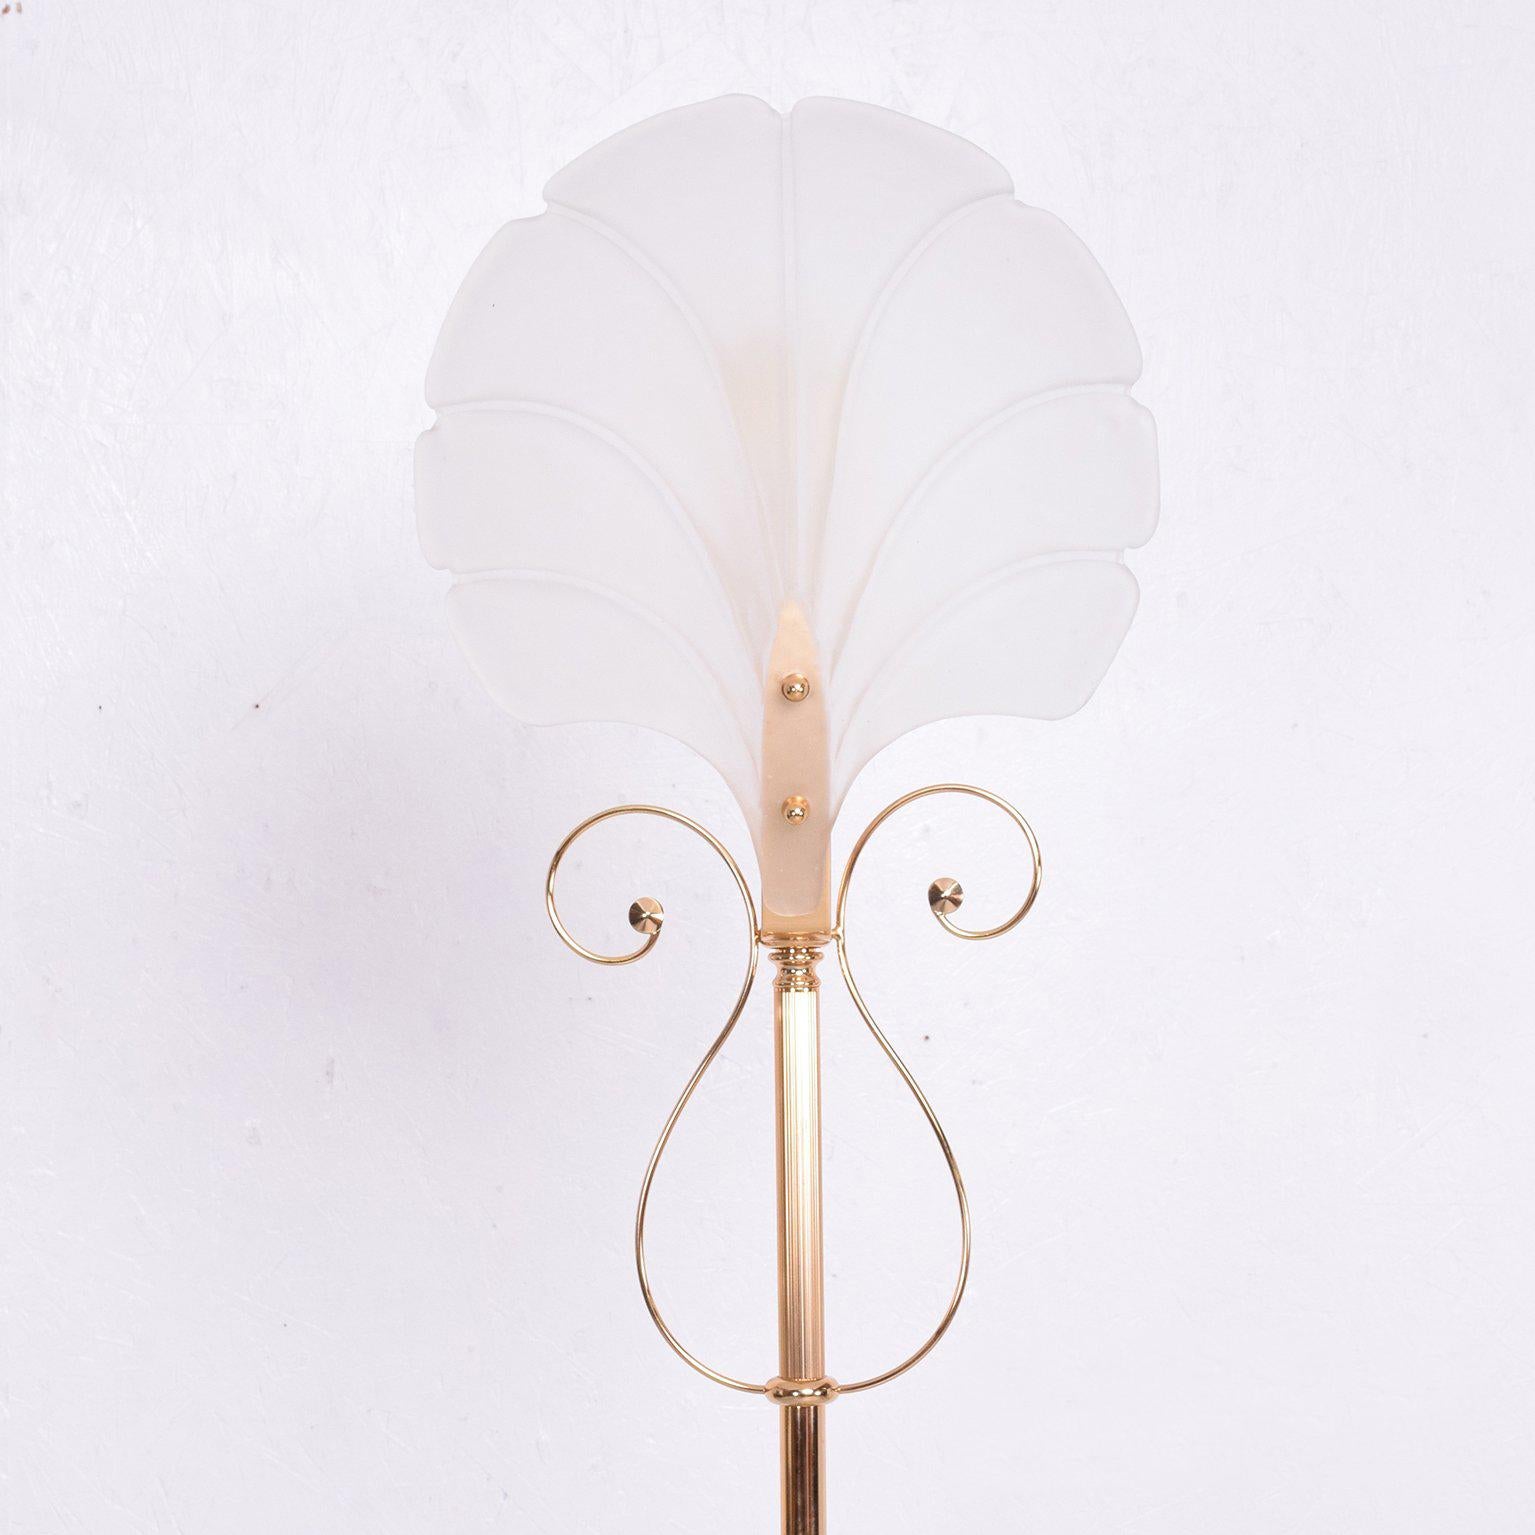 For your consideration a beautiful floor lamp in polished brass and glass shade after Lalique with great ornamentation.

Measures: 70 1/4